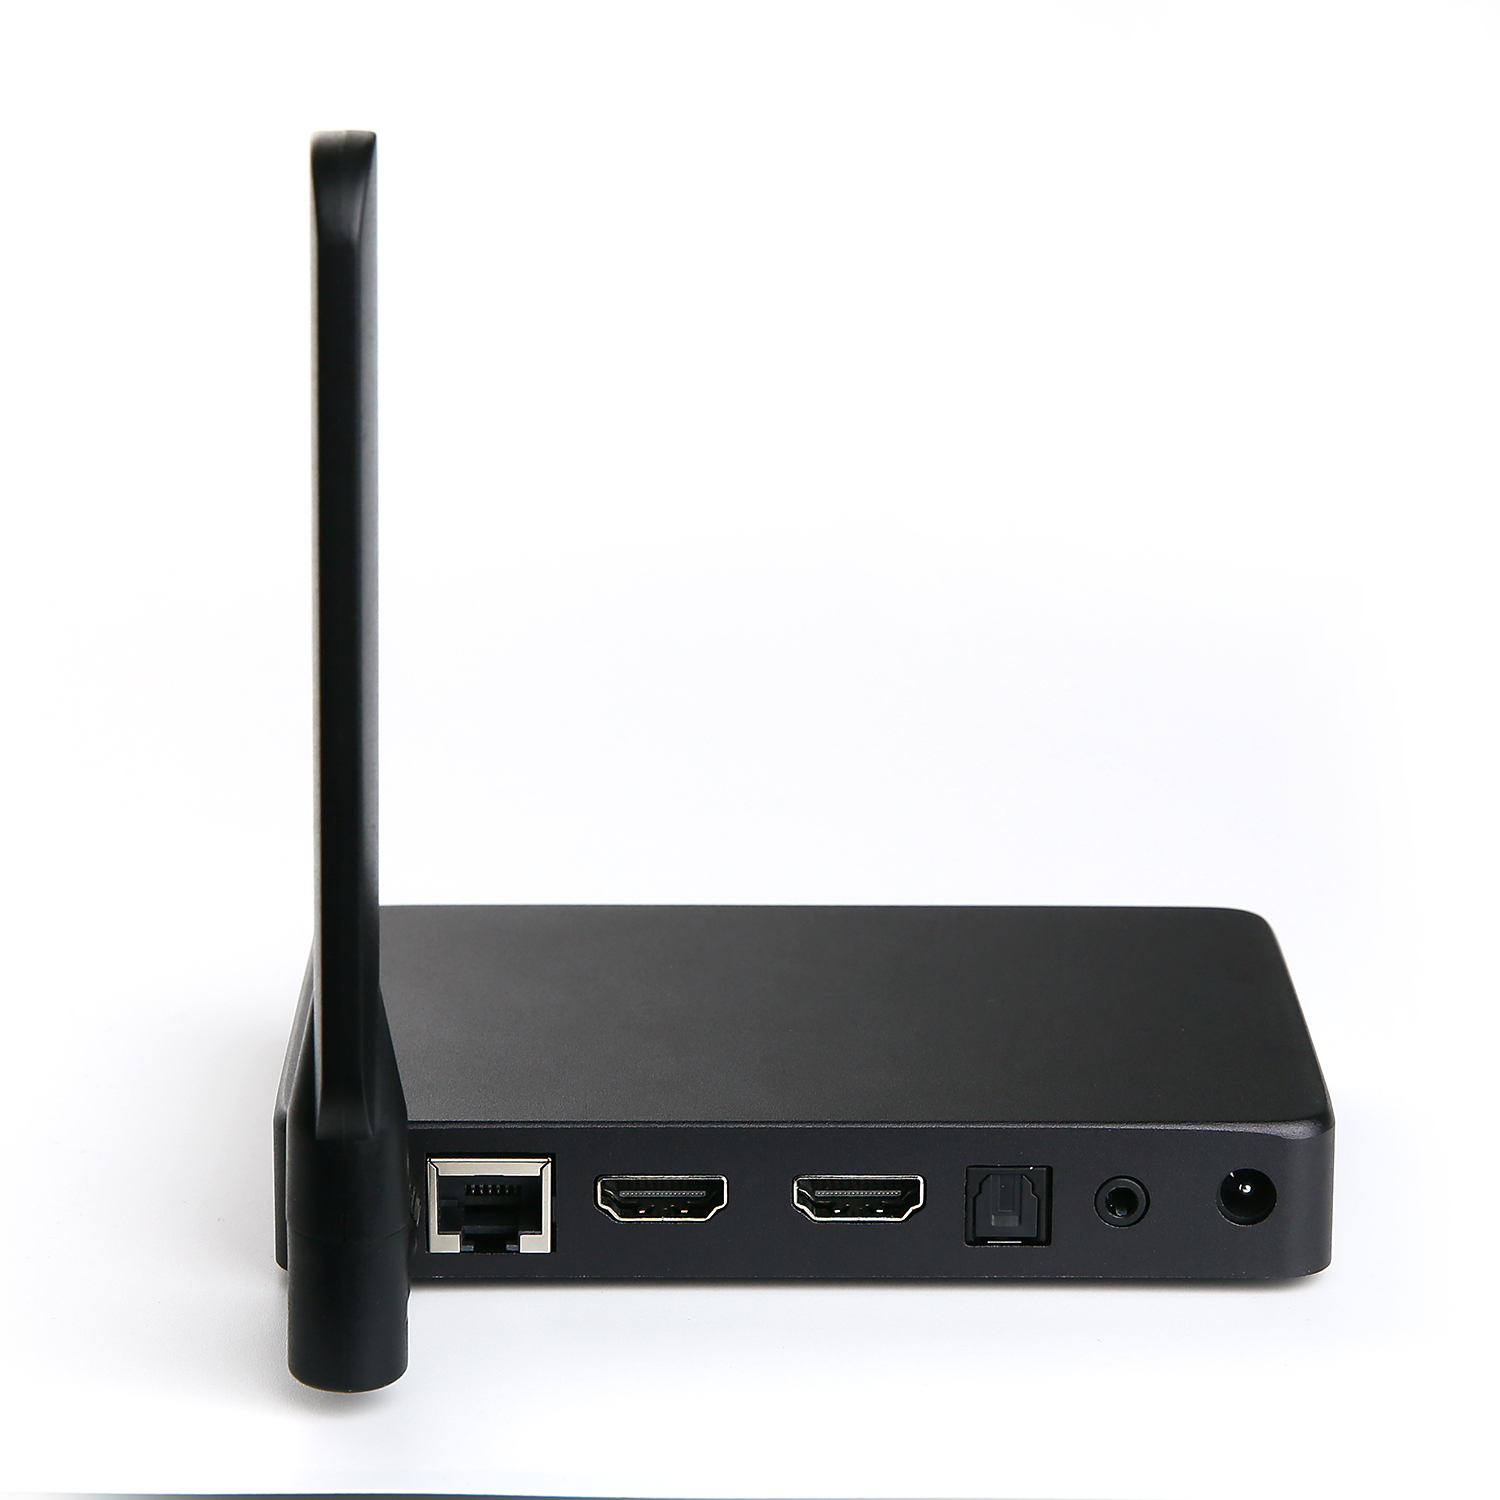 New Android TV Box with Android 6.0, Android tv box HDMI input for video recording